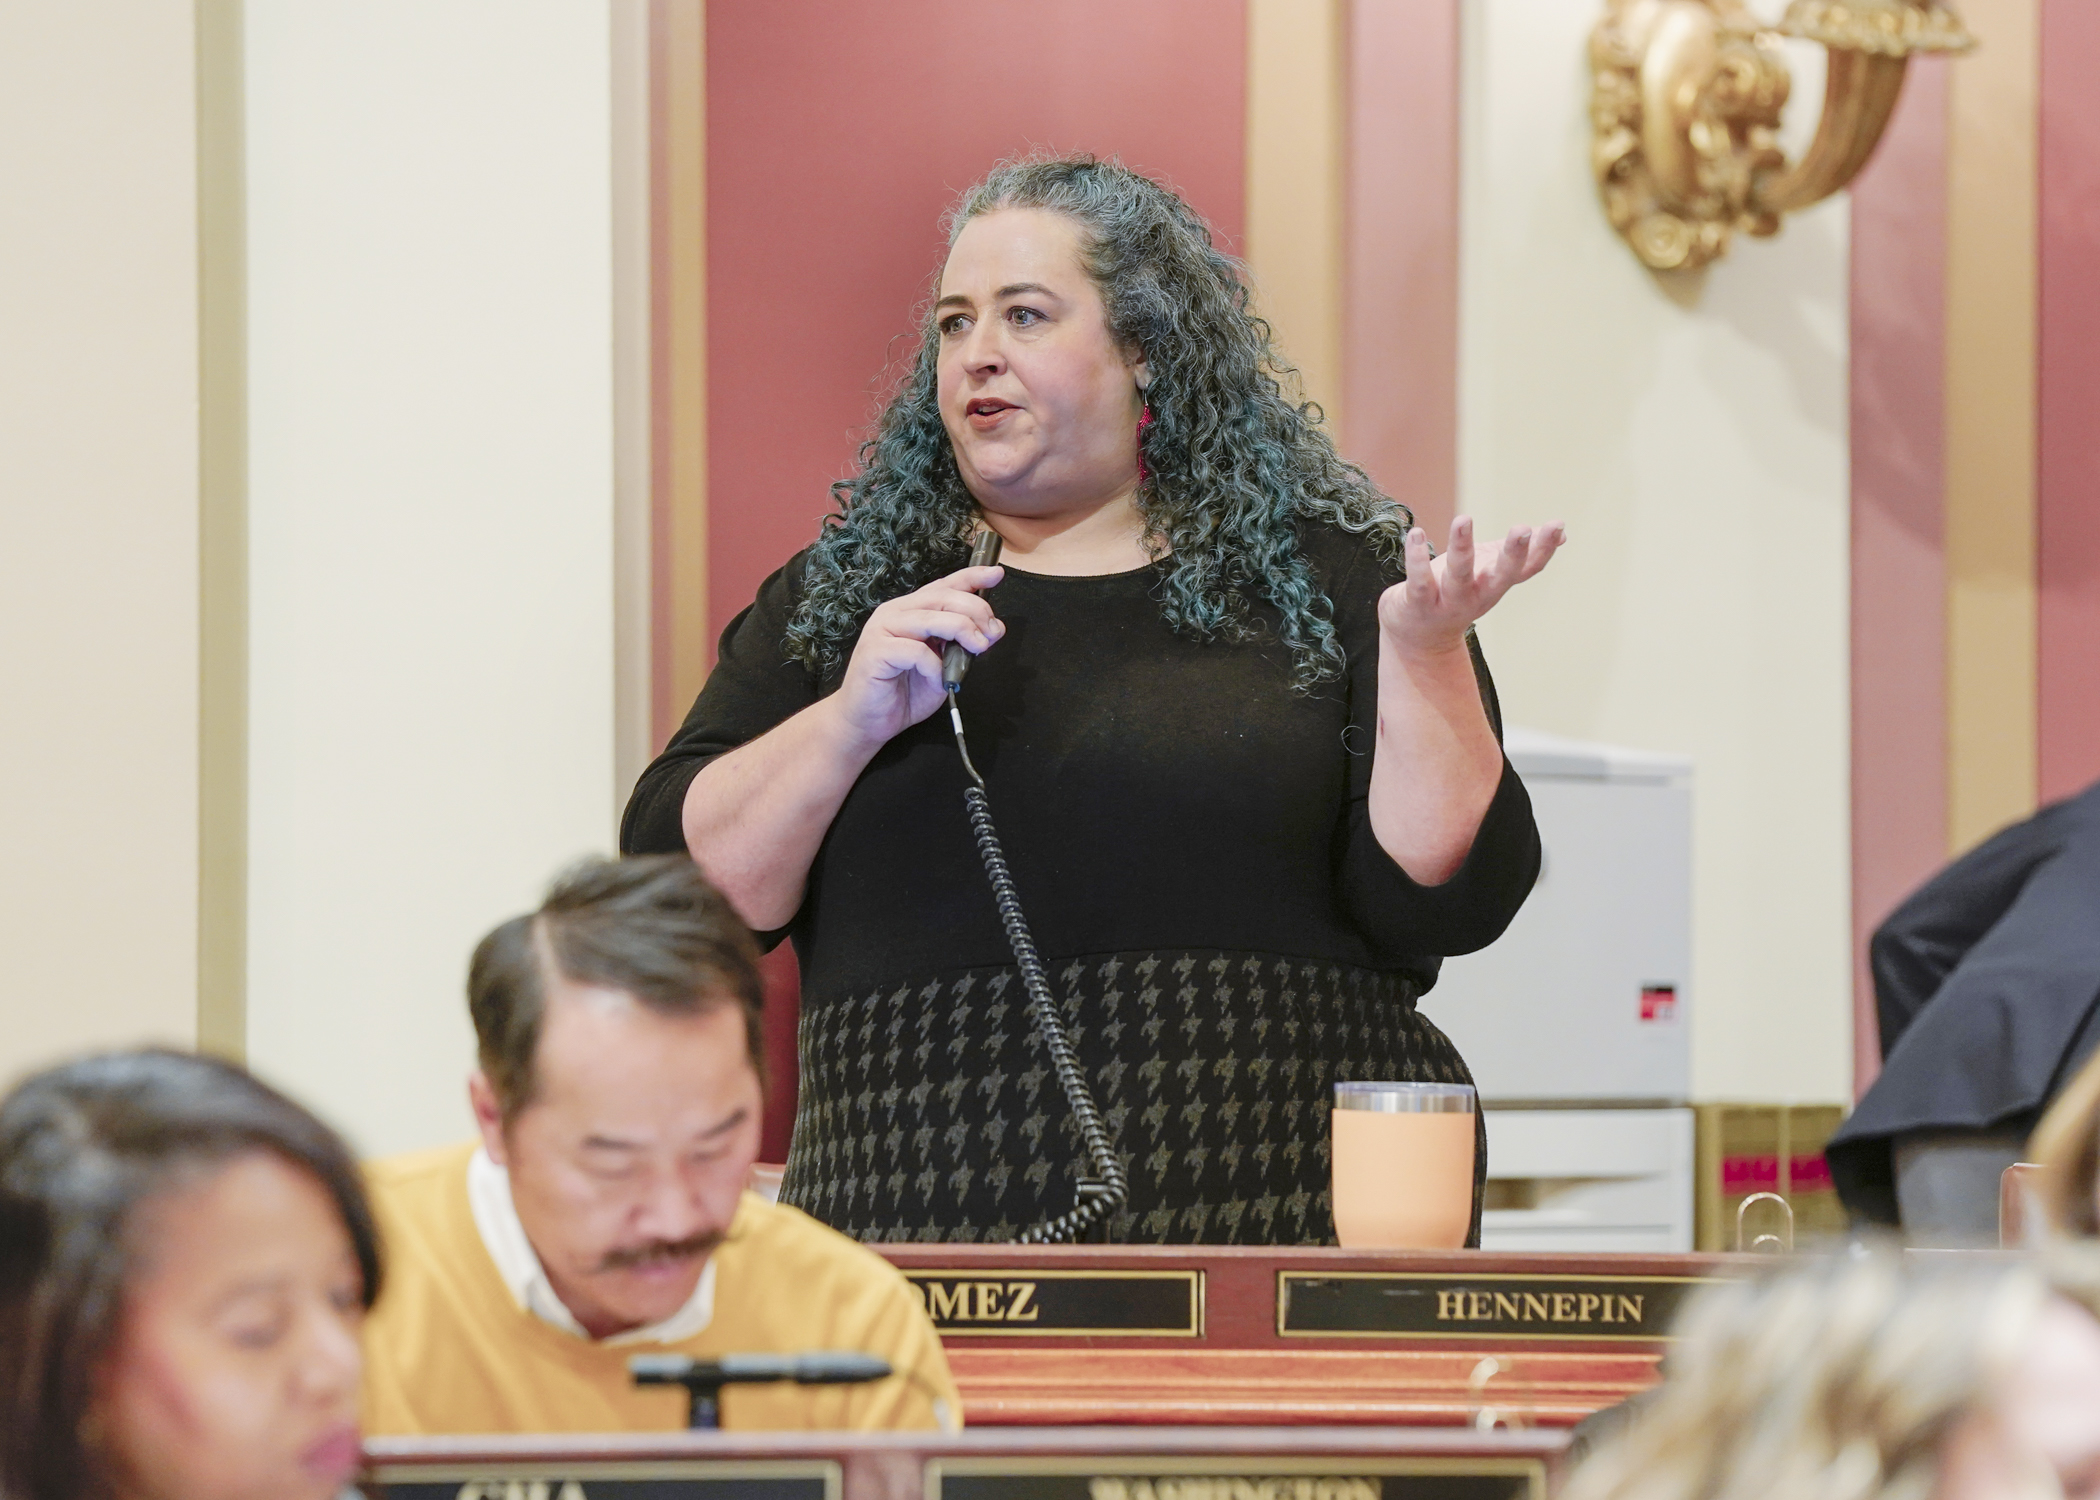 Rep. Aisha Gomez speaks on the House Floor Jan. 9 about HF31, a bill she sponsors that would conform certain Minnesota tax provisions with federal tax standards. The bill passed the House on a 132-0 vote. (Photo by Catherine Davis)